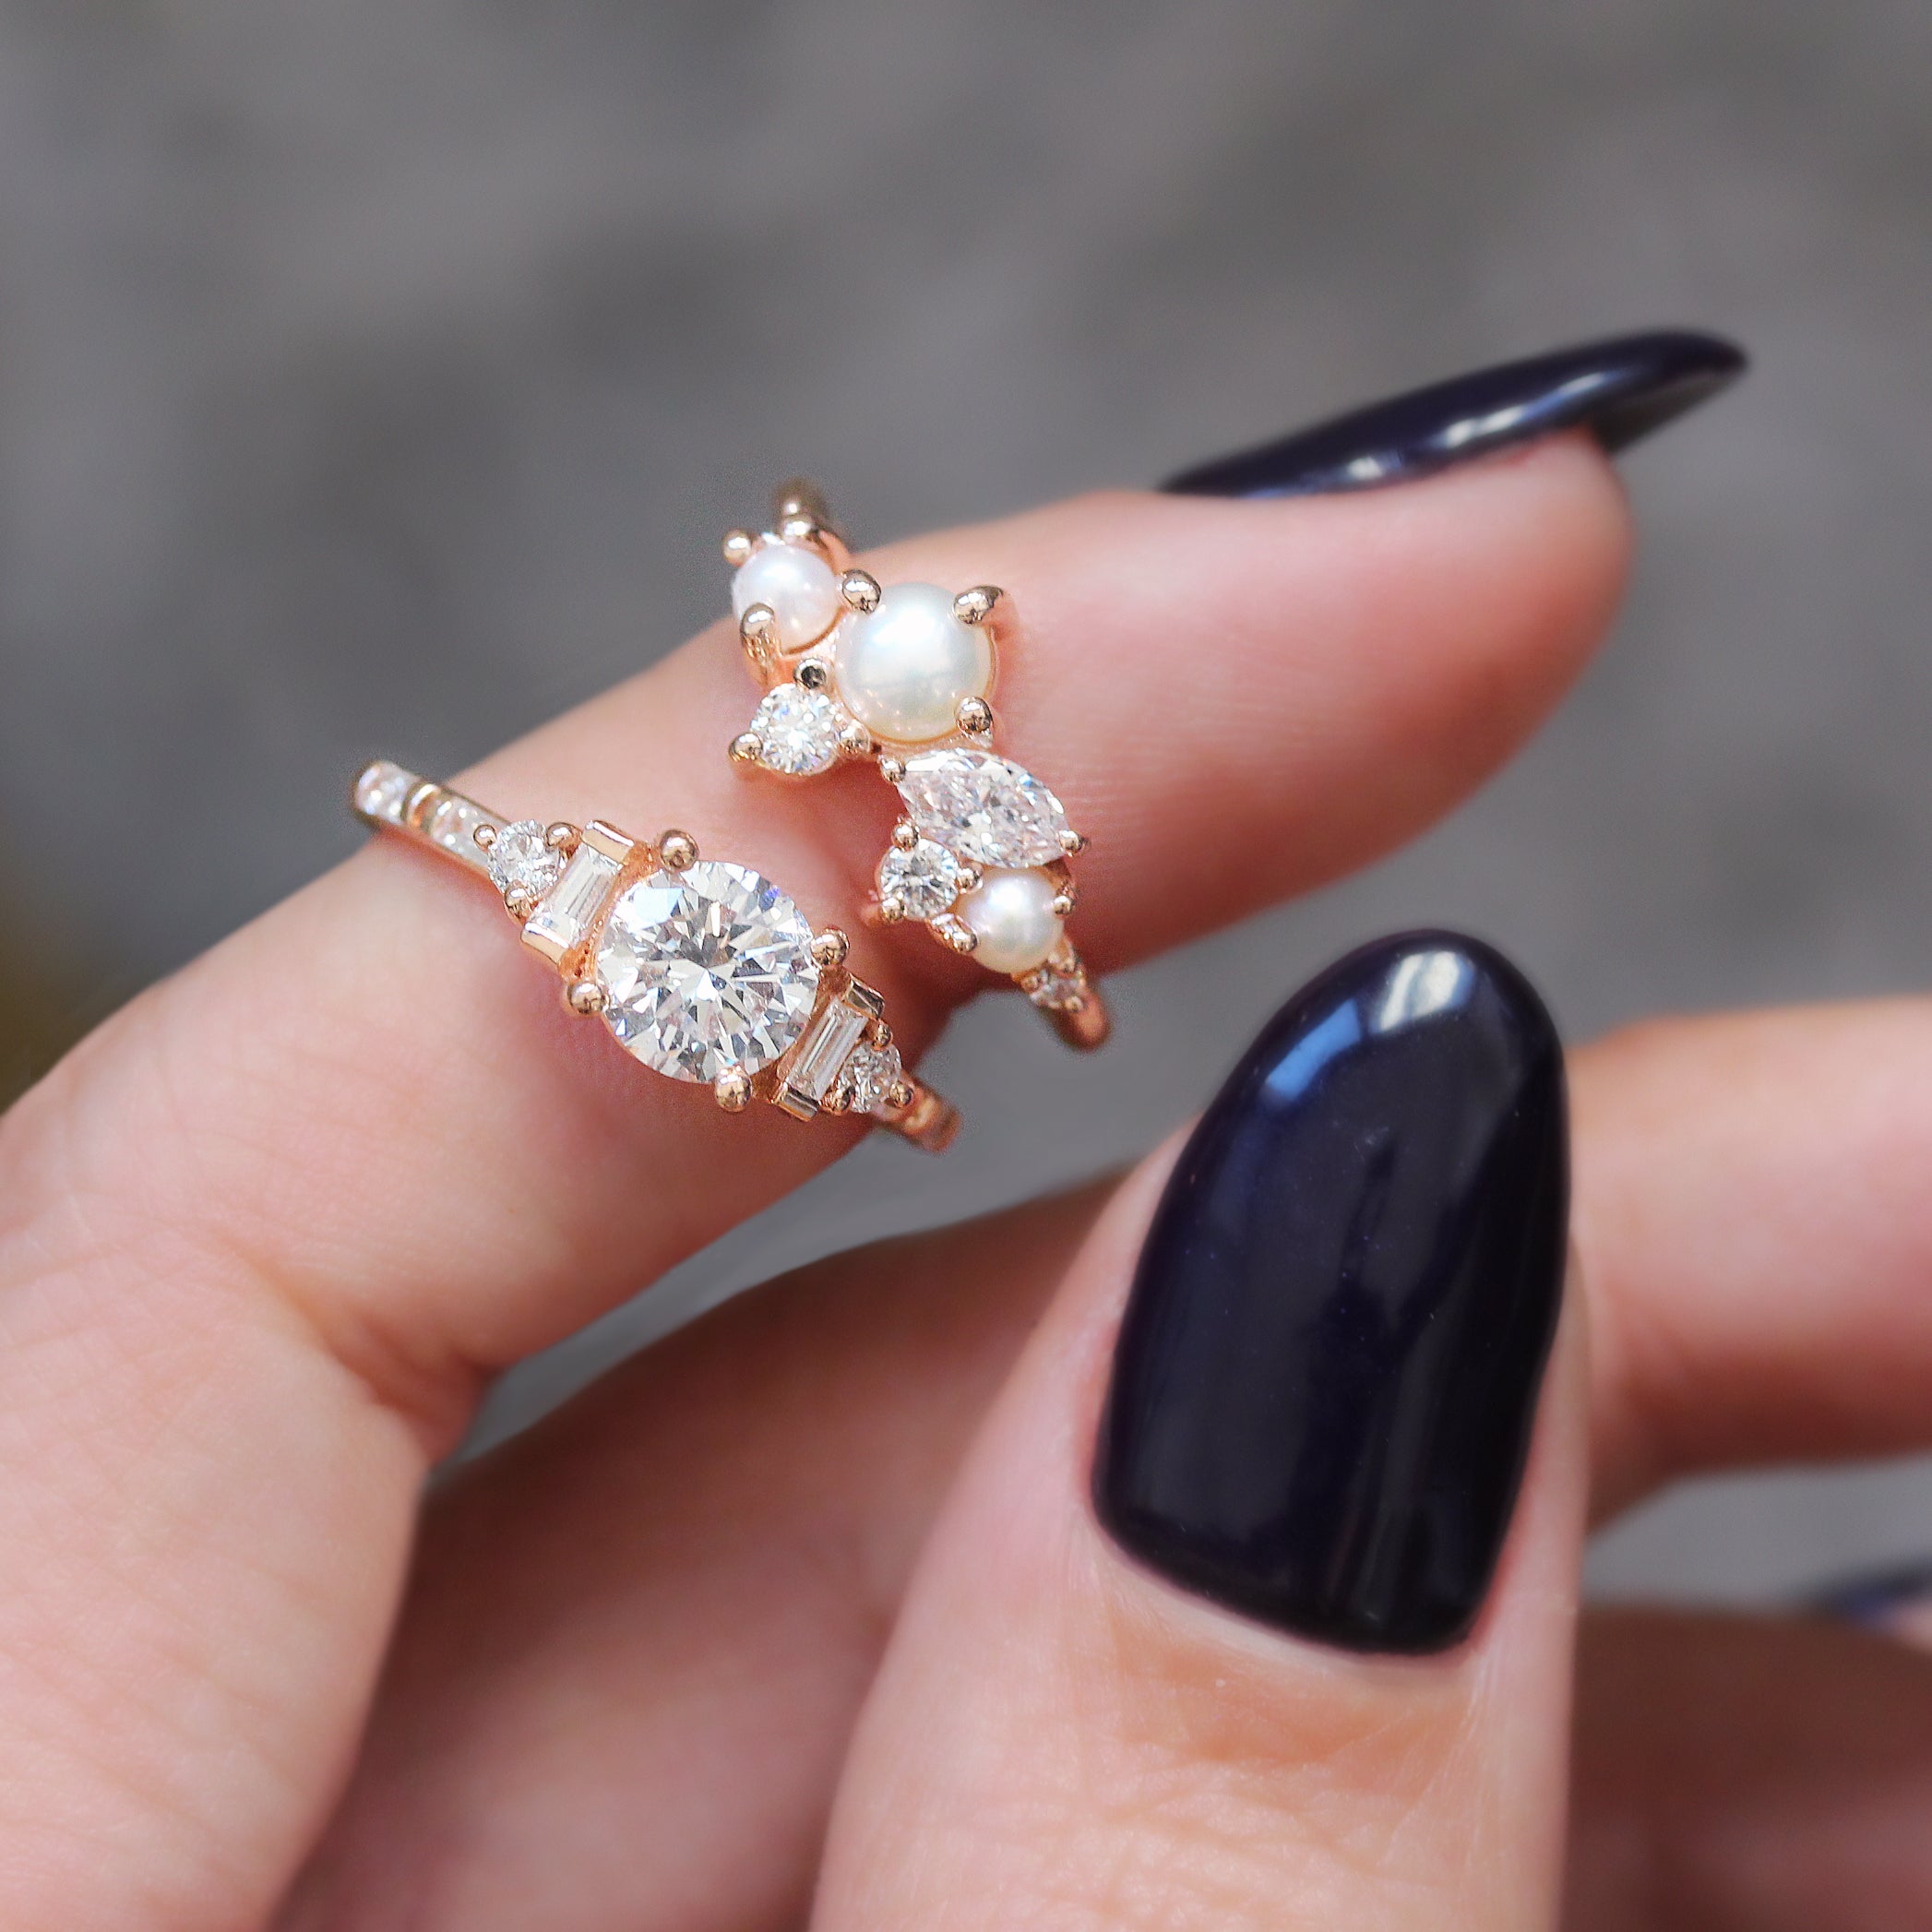 Round and Baguette Diamonds Cluster Engagement Ring - Alana